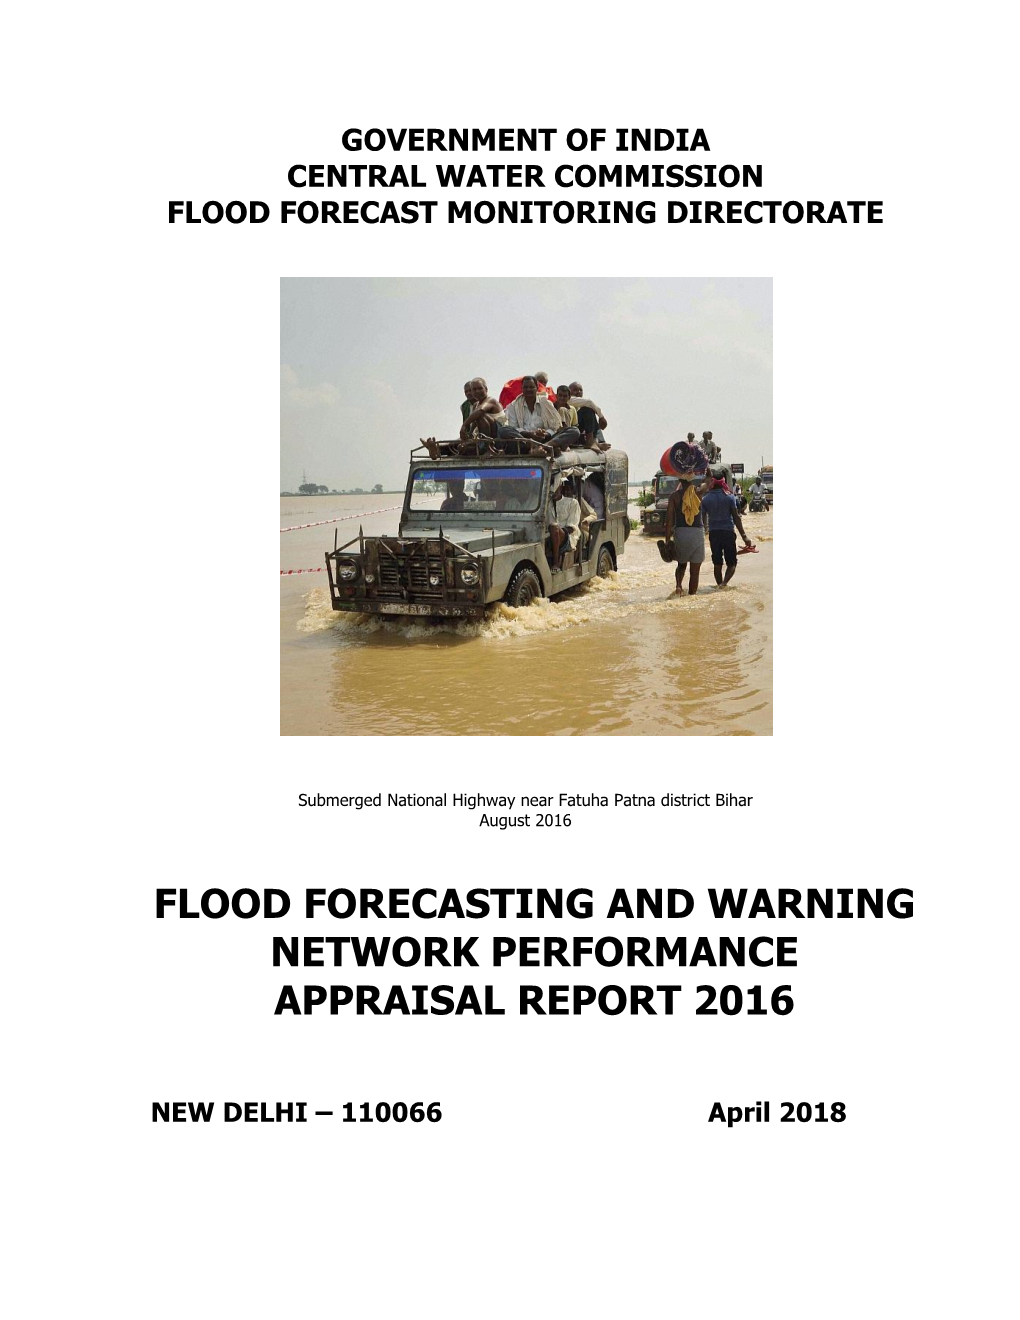 Flood Forecasting and Warning Network Performance Appraisal Report 2016